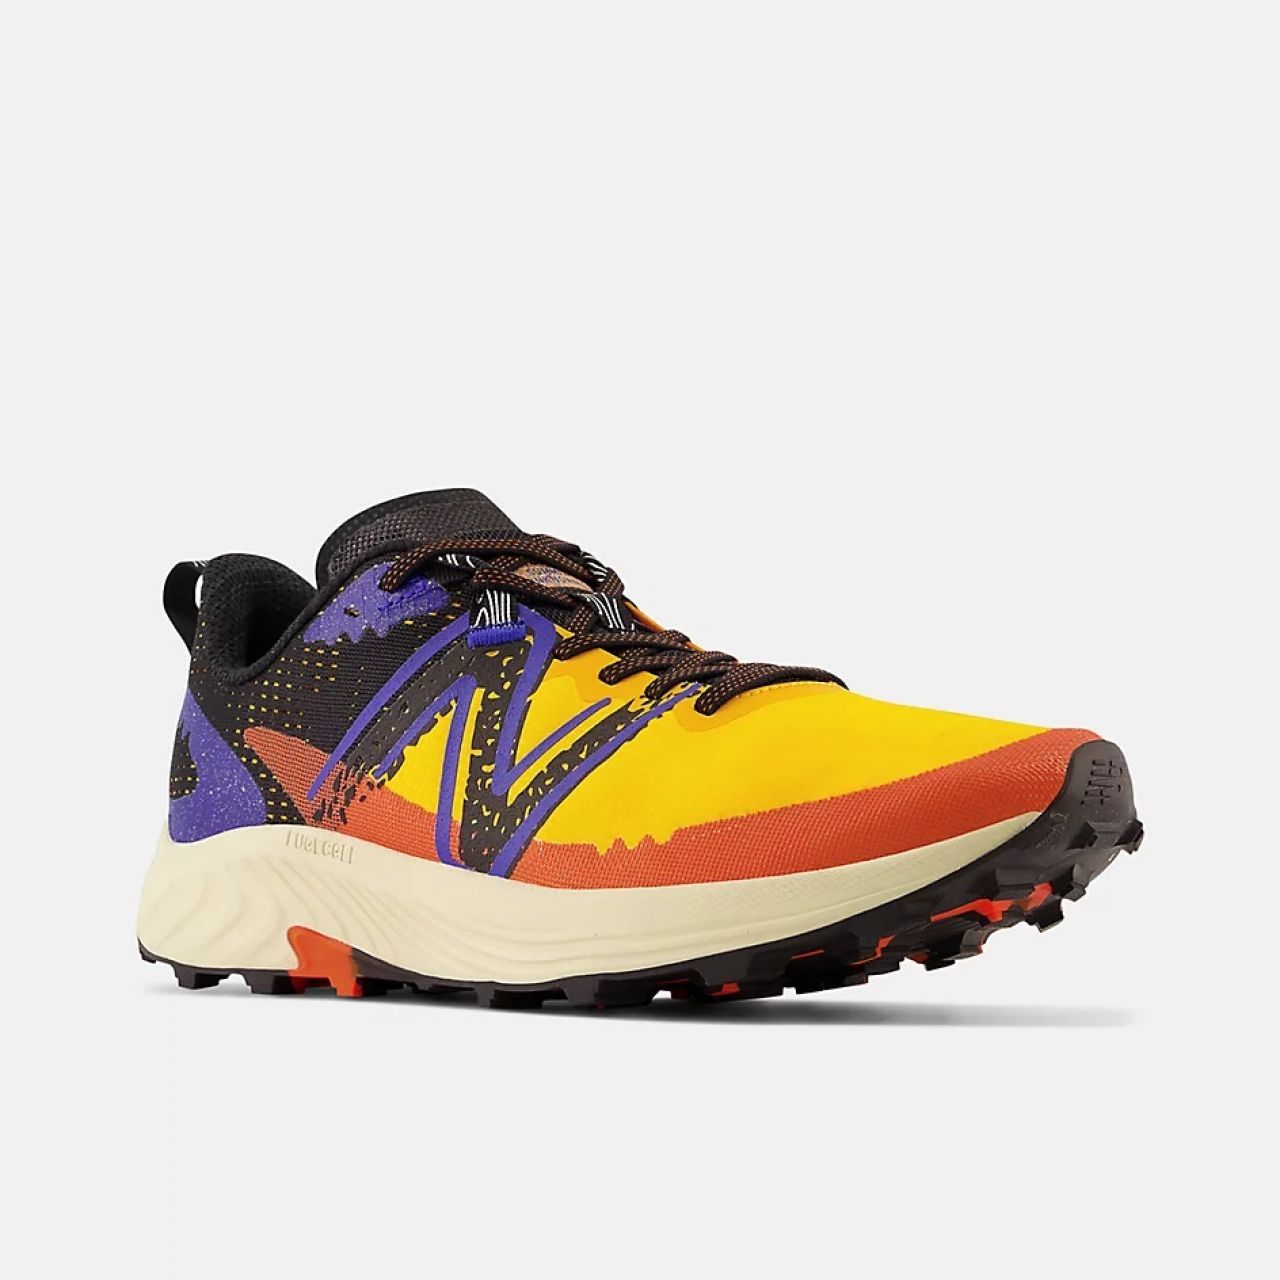 NEW BALANCE FUELCELL SUMMIT UNKNOWN V3 SUNFLOWER chaussure de trail